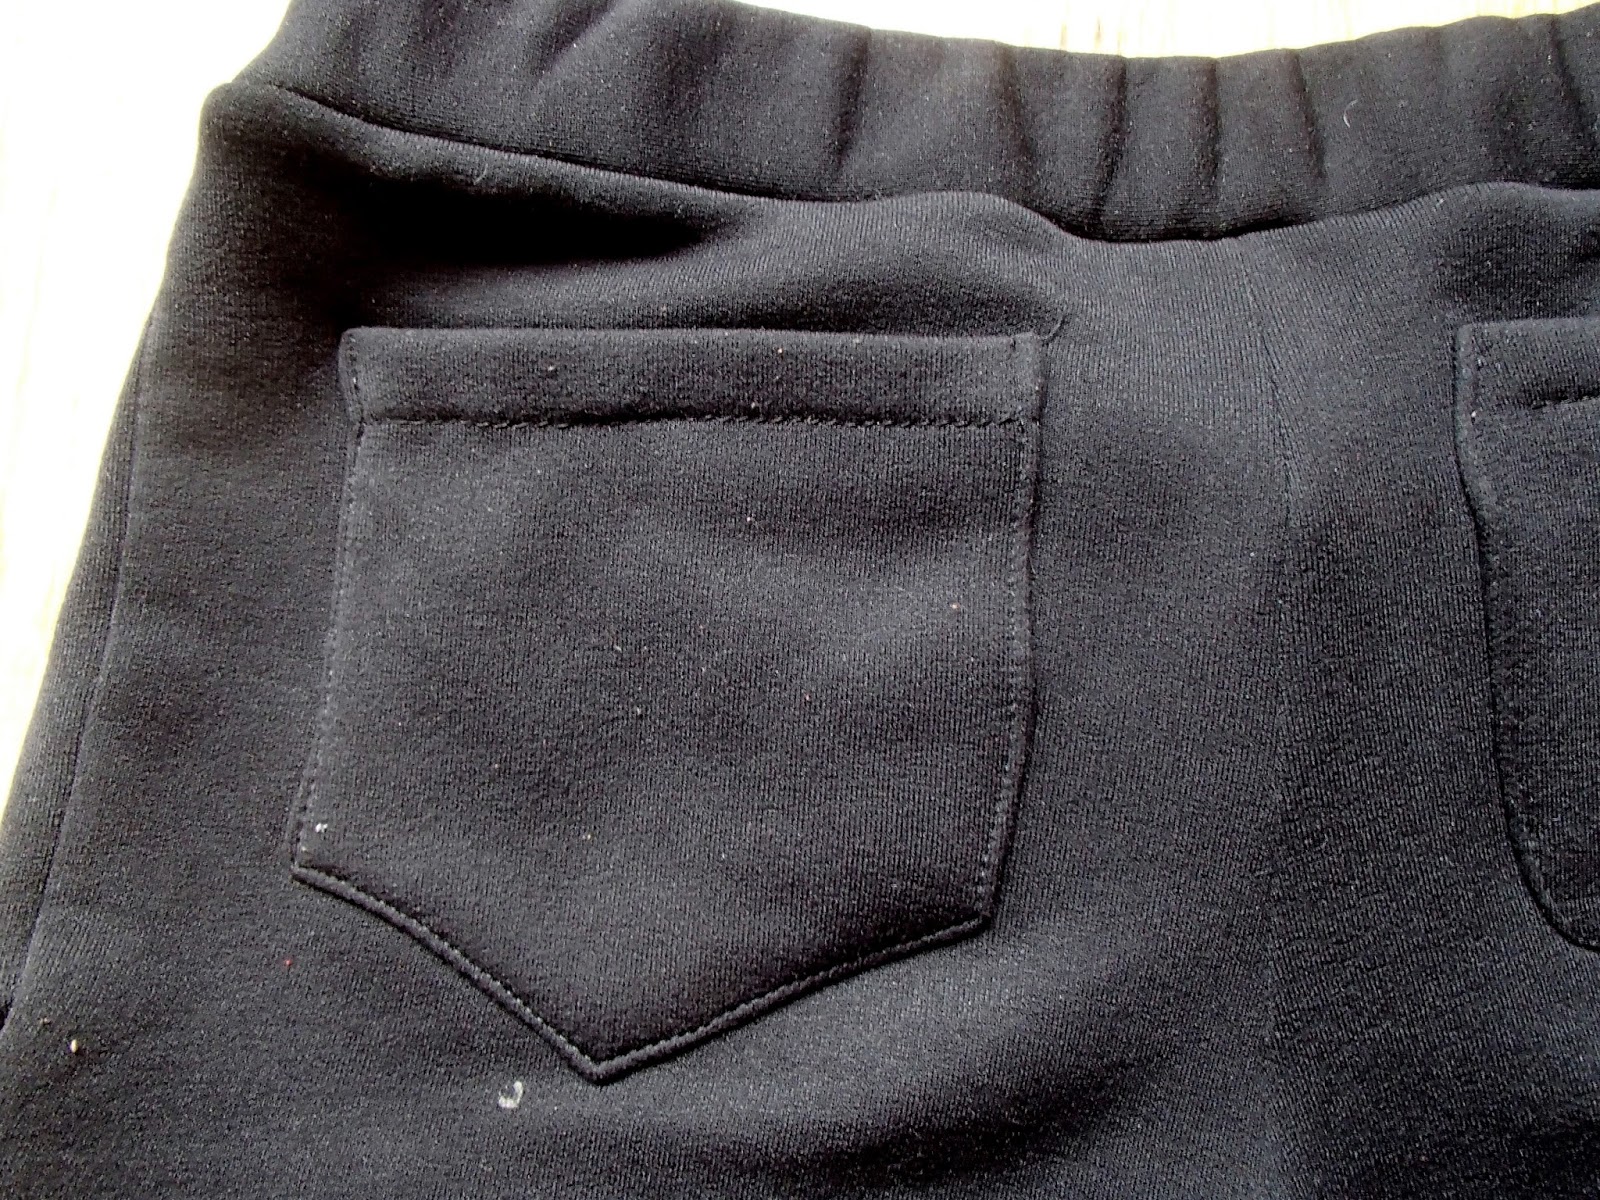 Made By Lesley: Quilted Linden Sweatshirt + Two Tone Futuristic Sweatpants